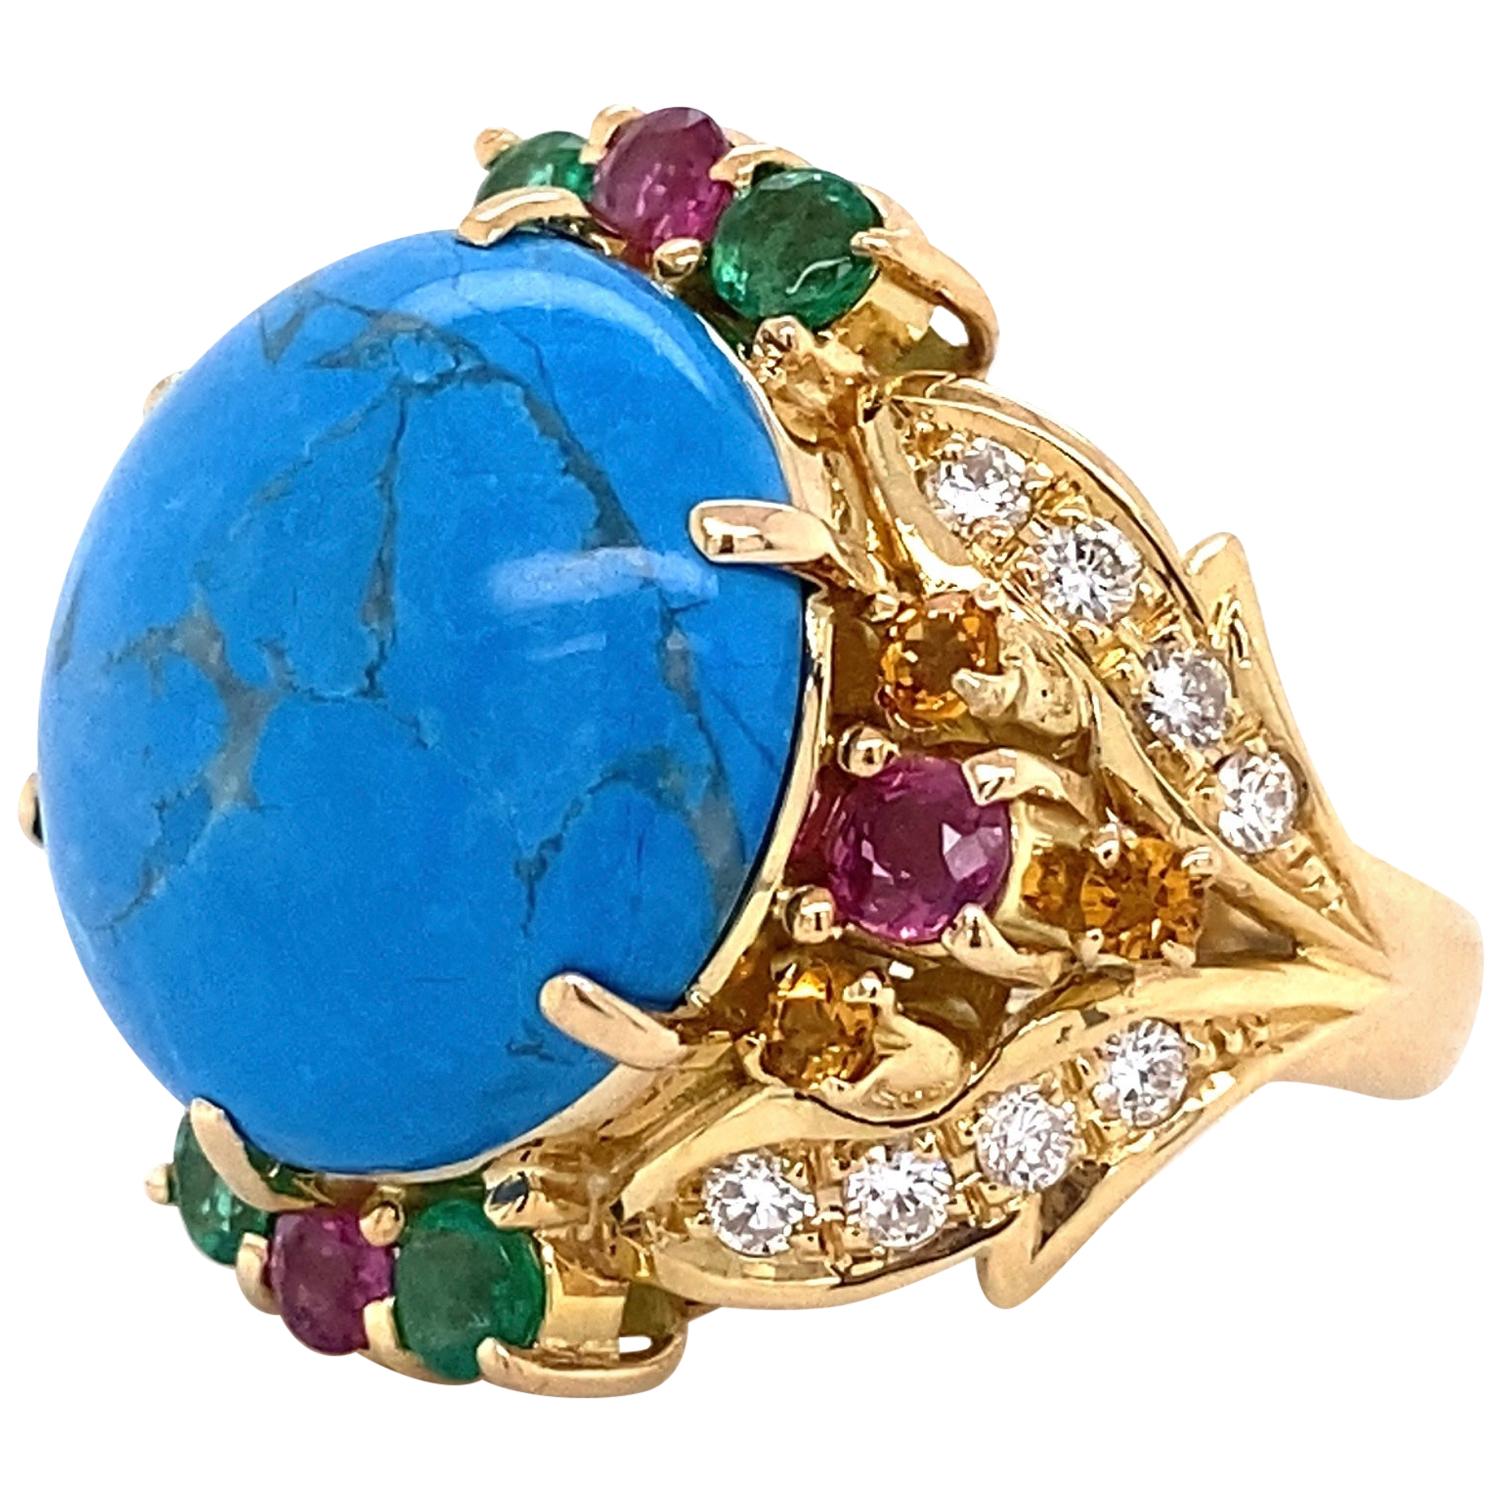 5.5 Carat Turquoise Diamond Emerald Ruby Gold Cocktail Ring Estate Fine Jewelry For Sale